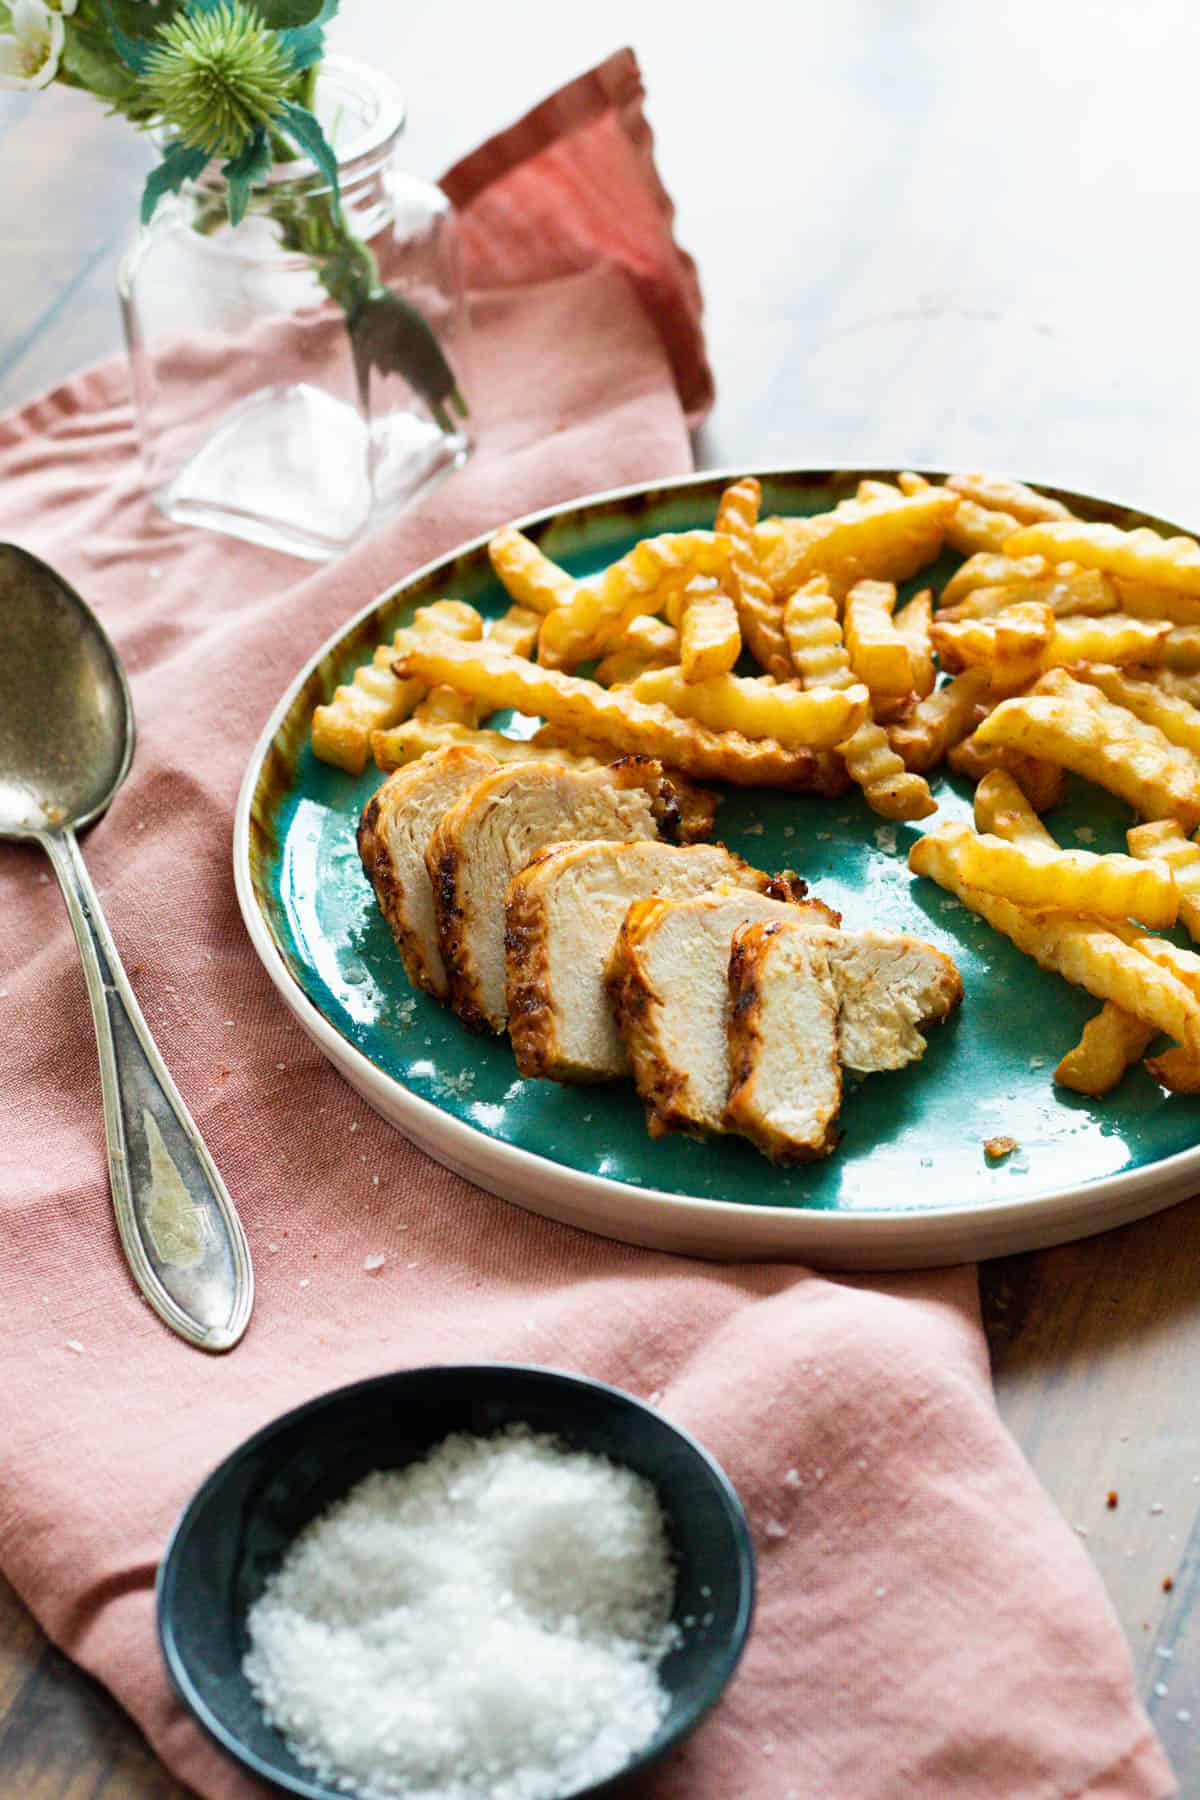 Sliced chicken breast on a blue plate with fries and sauce.